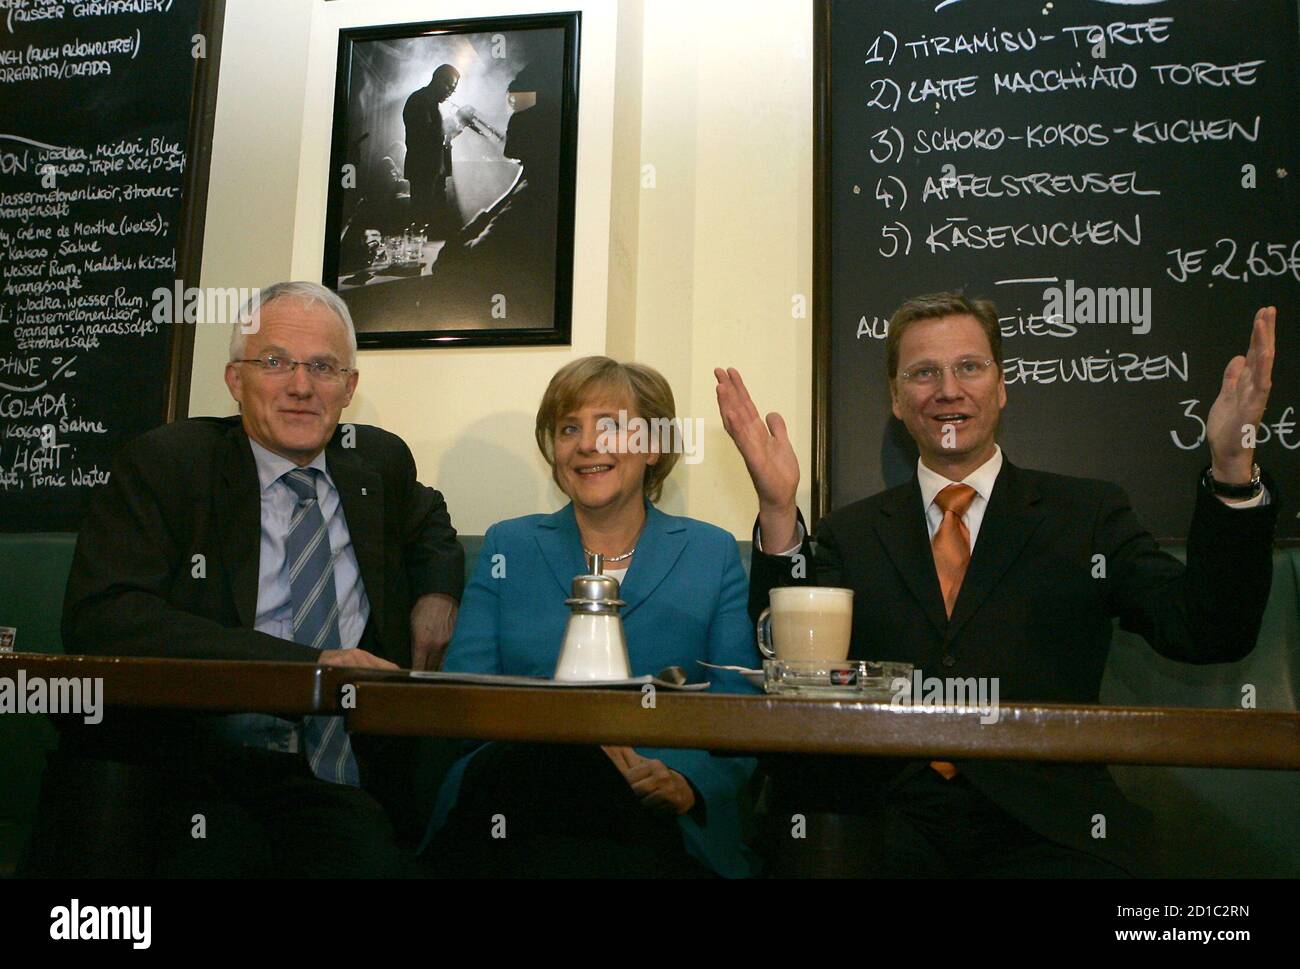 North-Rhine Westphalia's Prime Minister Ruettgers Conservative challenger Merkel and FDP leader Westerwelle pose for photographers in Bonn.  North-Rhine Westphalia's Prime Minister Juergen Ruettgers (L) Conservative challenger Angela Merkel (C) leader of Germany's Christian Democratic Union (CDU) and Guido Westerwelle, leader of the German liberal Free Democratic Party (FDP) pose for photographers in a restaurant in the western German city of Bonn September 17, 2005. German Chancellor Gerhard Schroeder and his rival Angela Merkel launched a final drive on election eve on Saturday to win over u Stock Photo